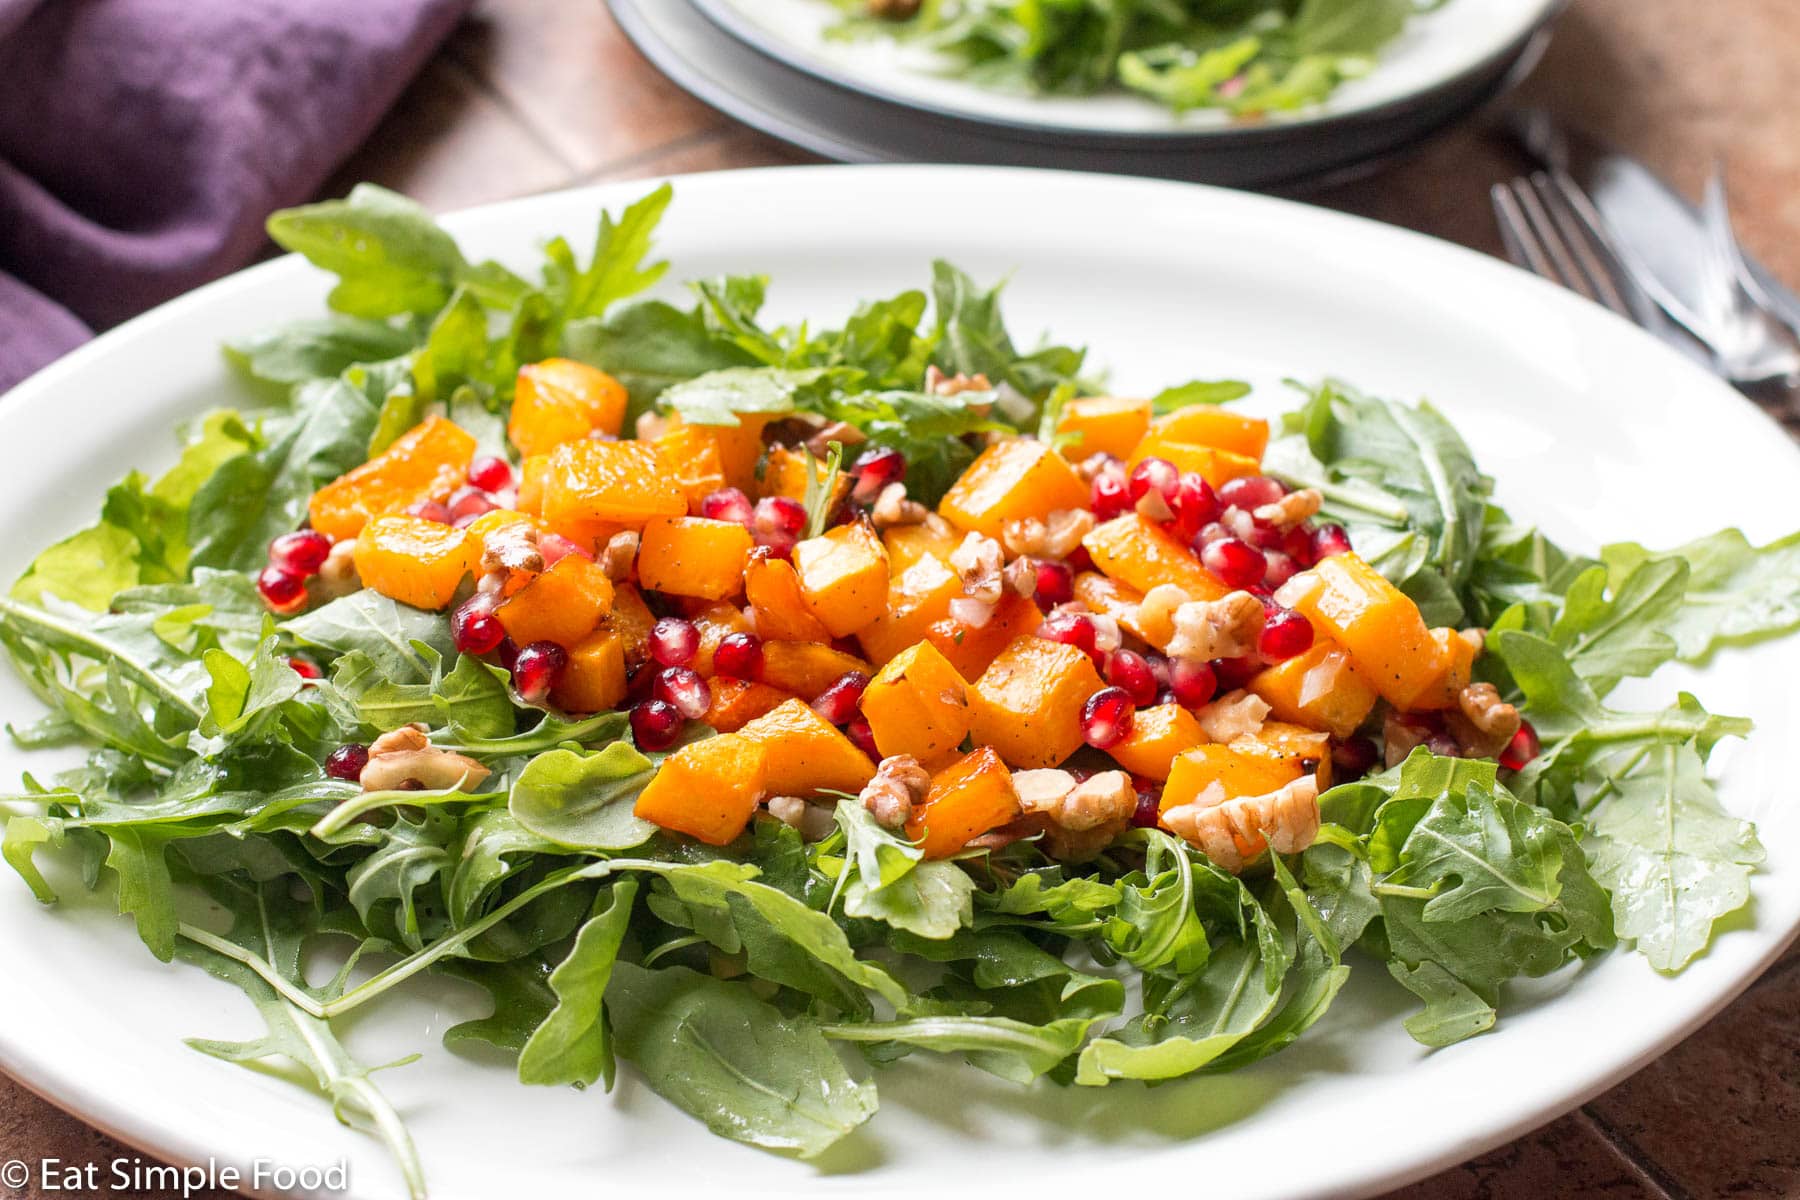 Roasted butternut squash on top of arugula on a white plate. Garnished with chopped walnuts and red pomegranate kernels. side view.